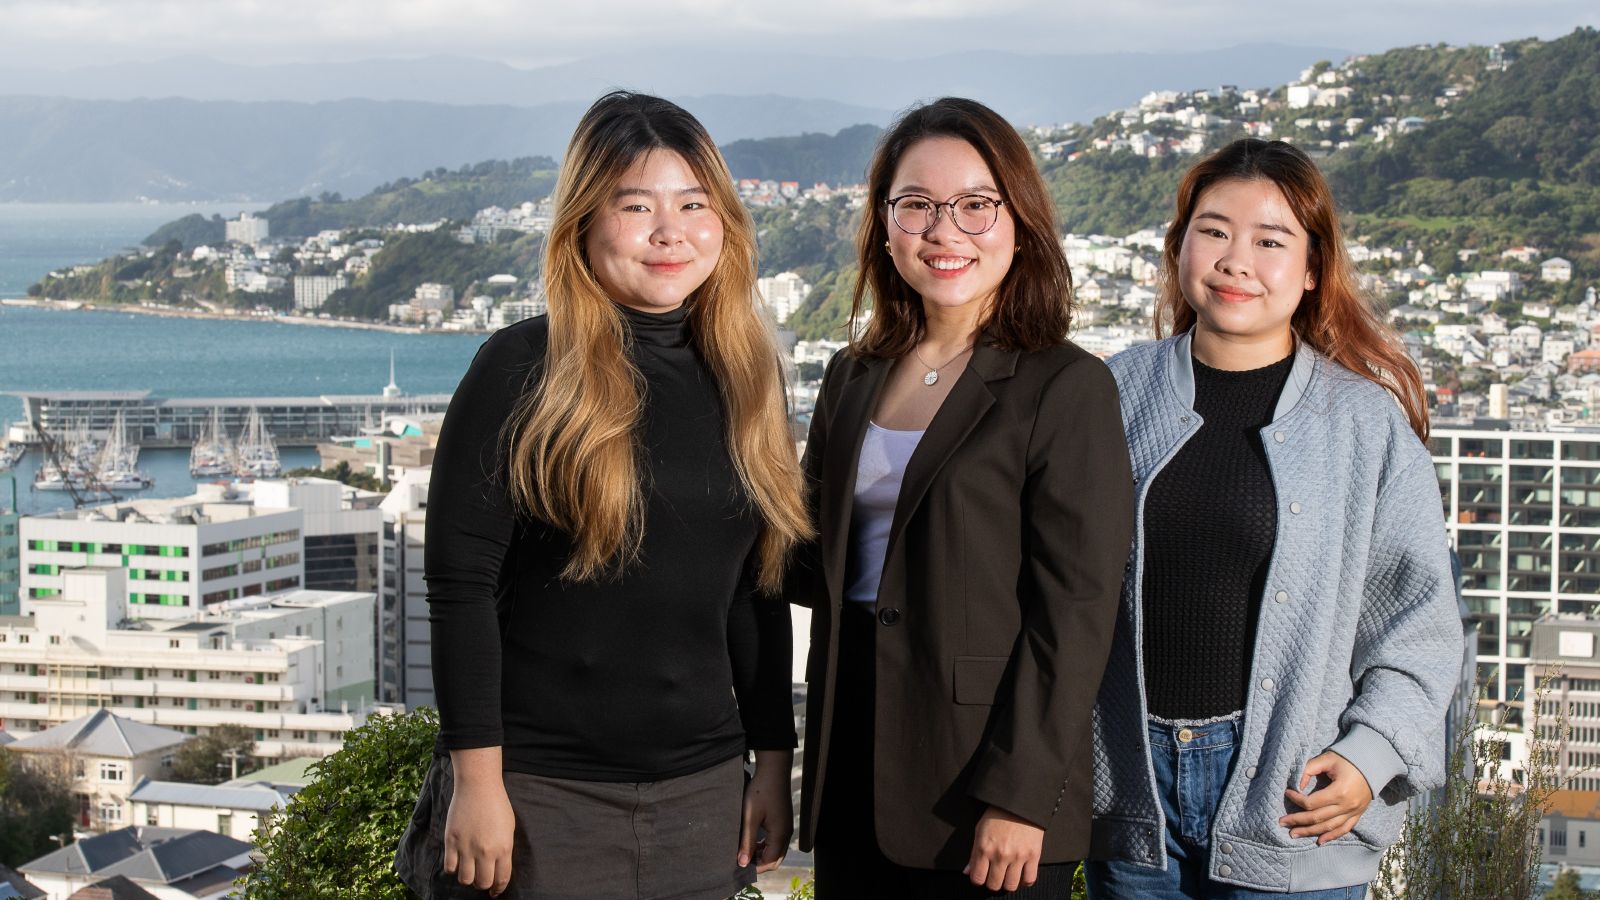 Three sisters from Vietnam, who study at Victoria University of Wellington in New Zealand, overlooking the iconic waterfront and city buildings.